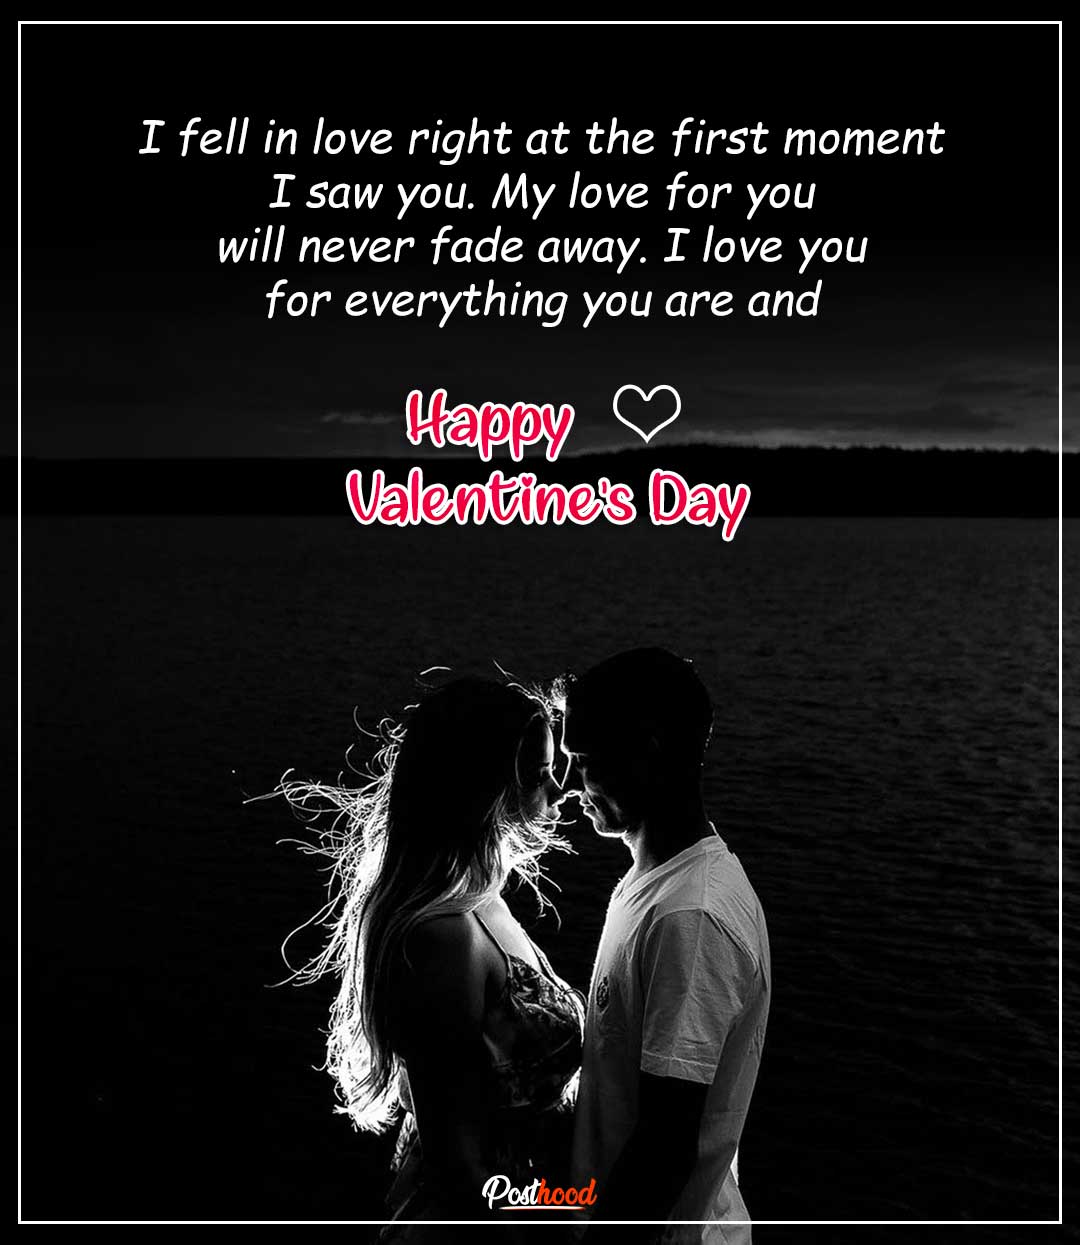 I fall in love very first I saw you. Express your love to your Valentine in the most romantic way with these sweet love messages.